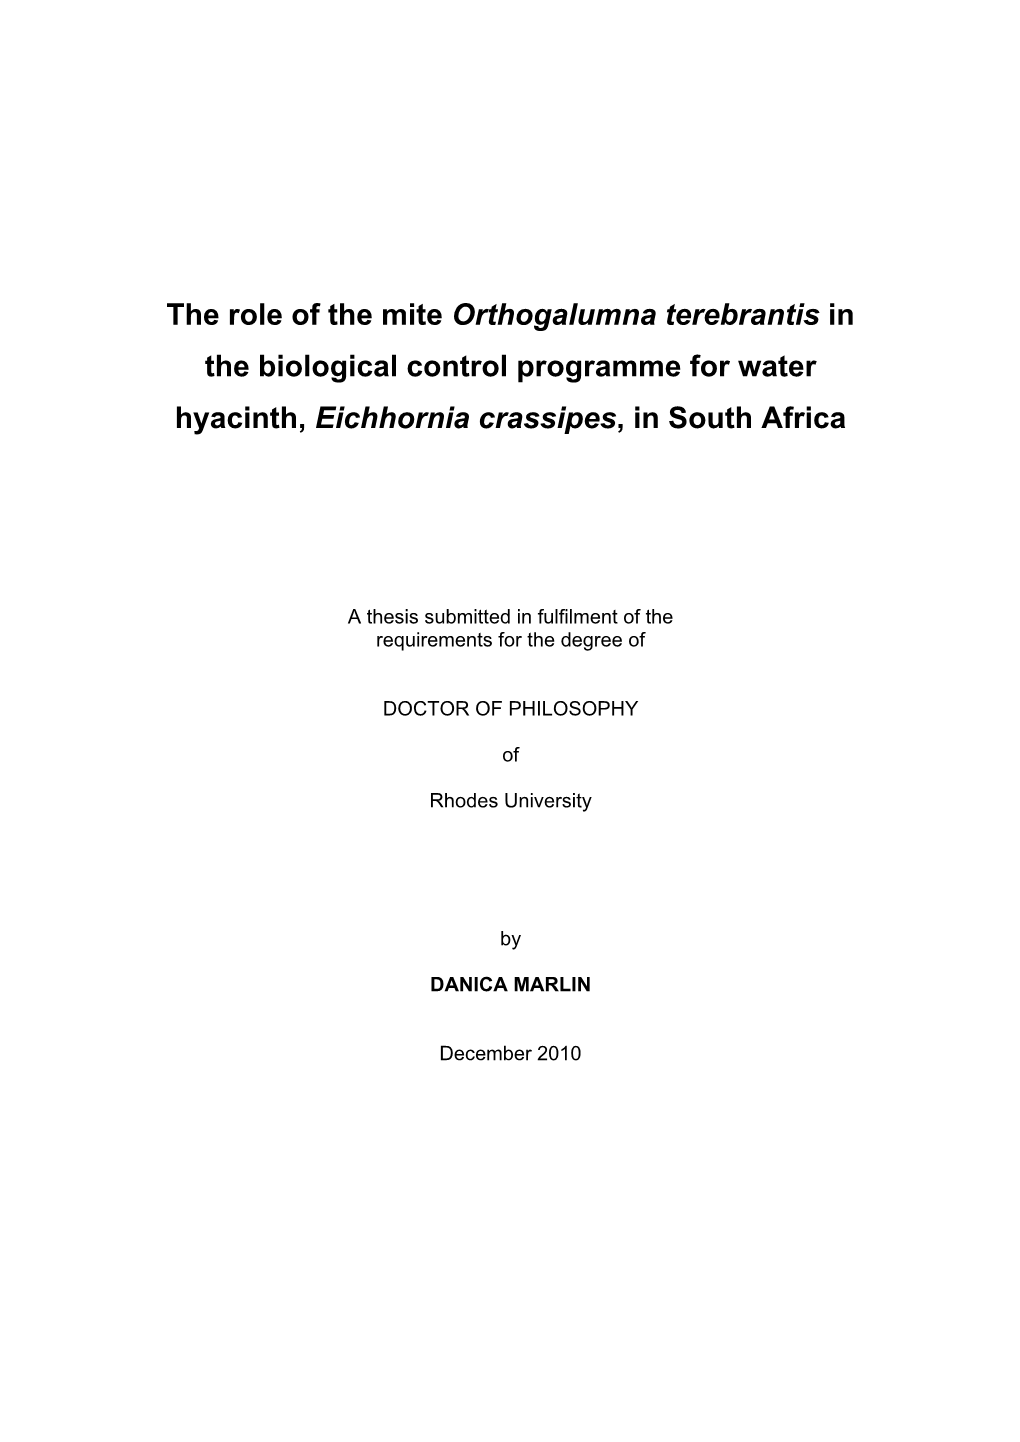 The Role of the Mite Orthogalumna Terebrantis in the Biological Control Programme for Water Hyacinth, Eichhornia Crassipes, in South Africa